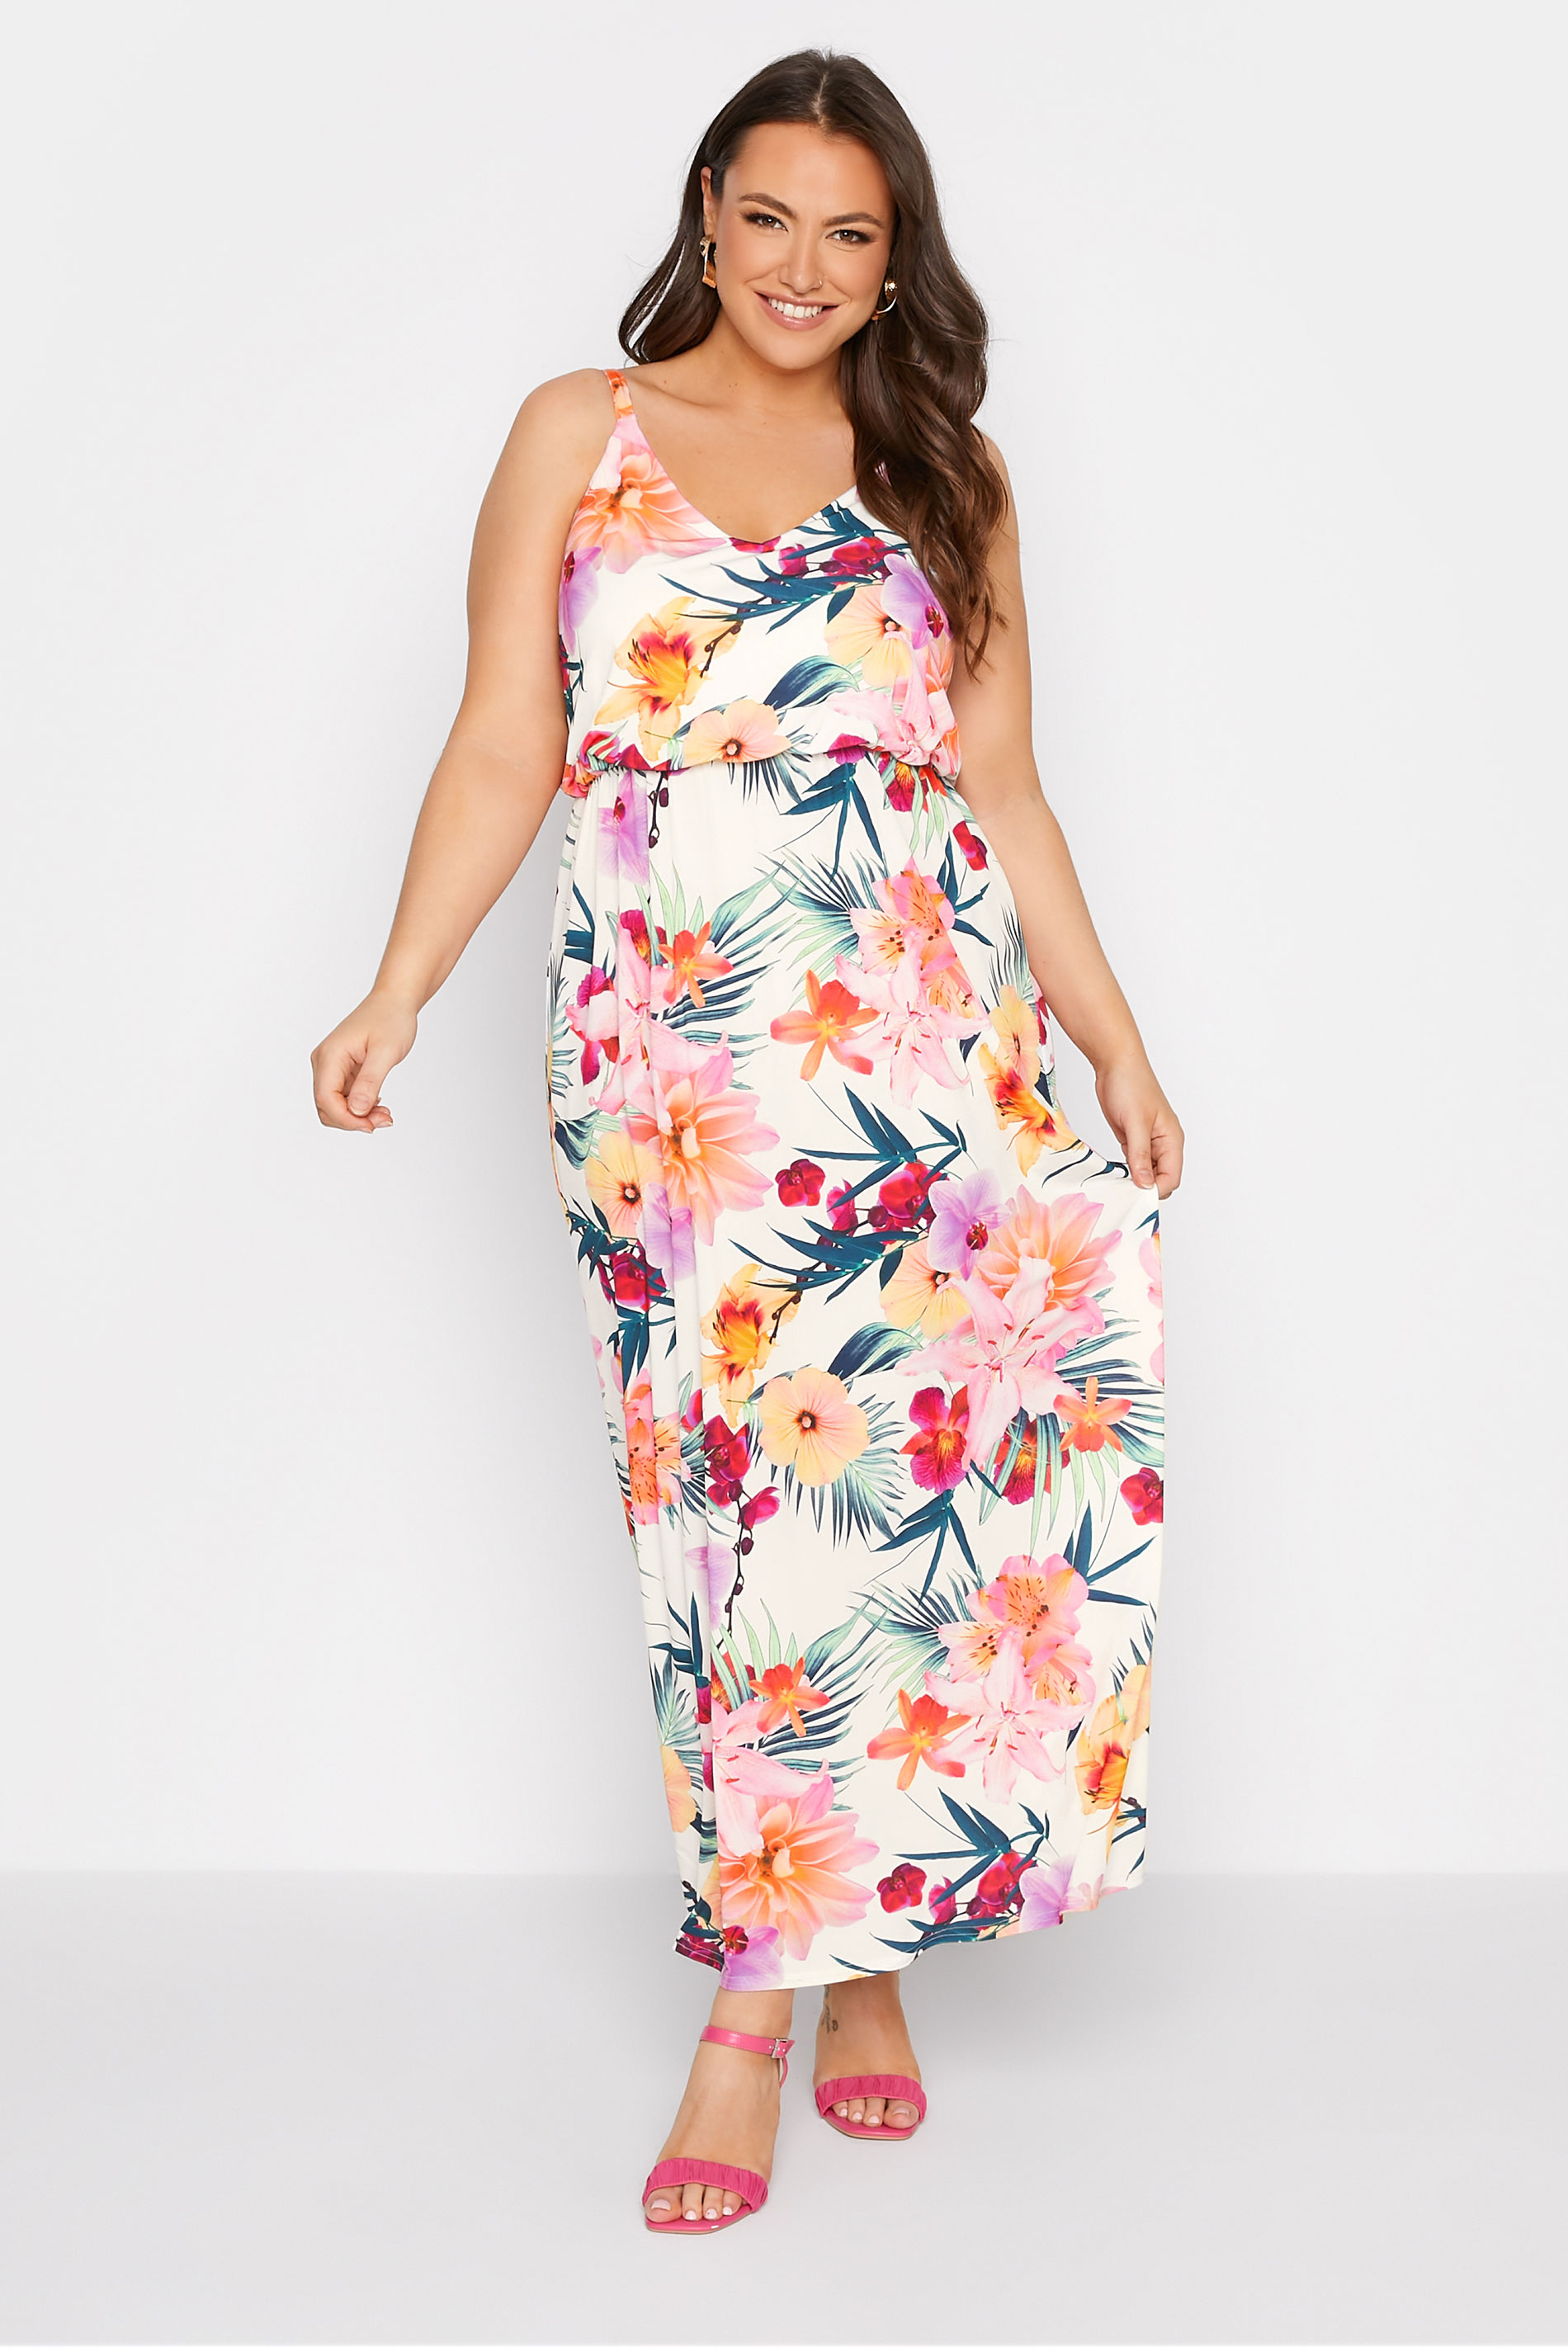 Robes Grande Taille Grande taille  Robes Longues | YOURS LONDON - Robe Blanche Imprimé Floral Tropical - QH23739